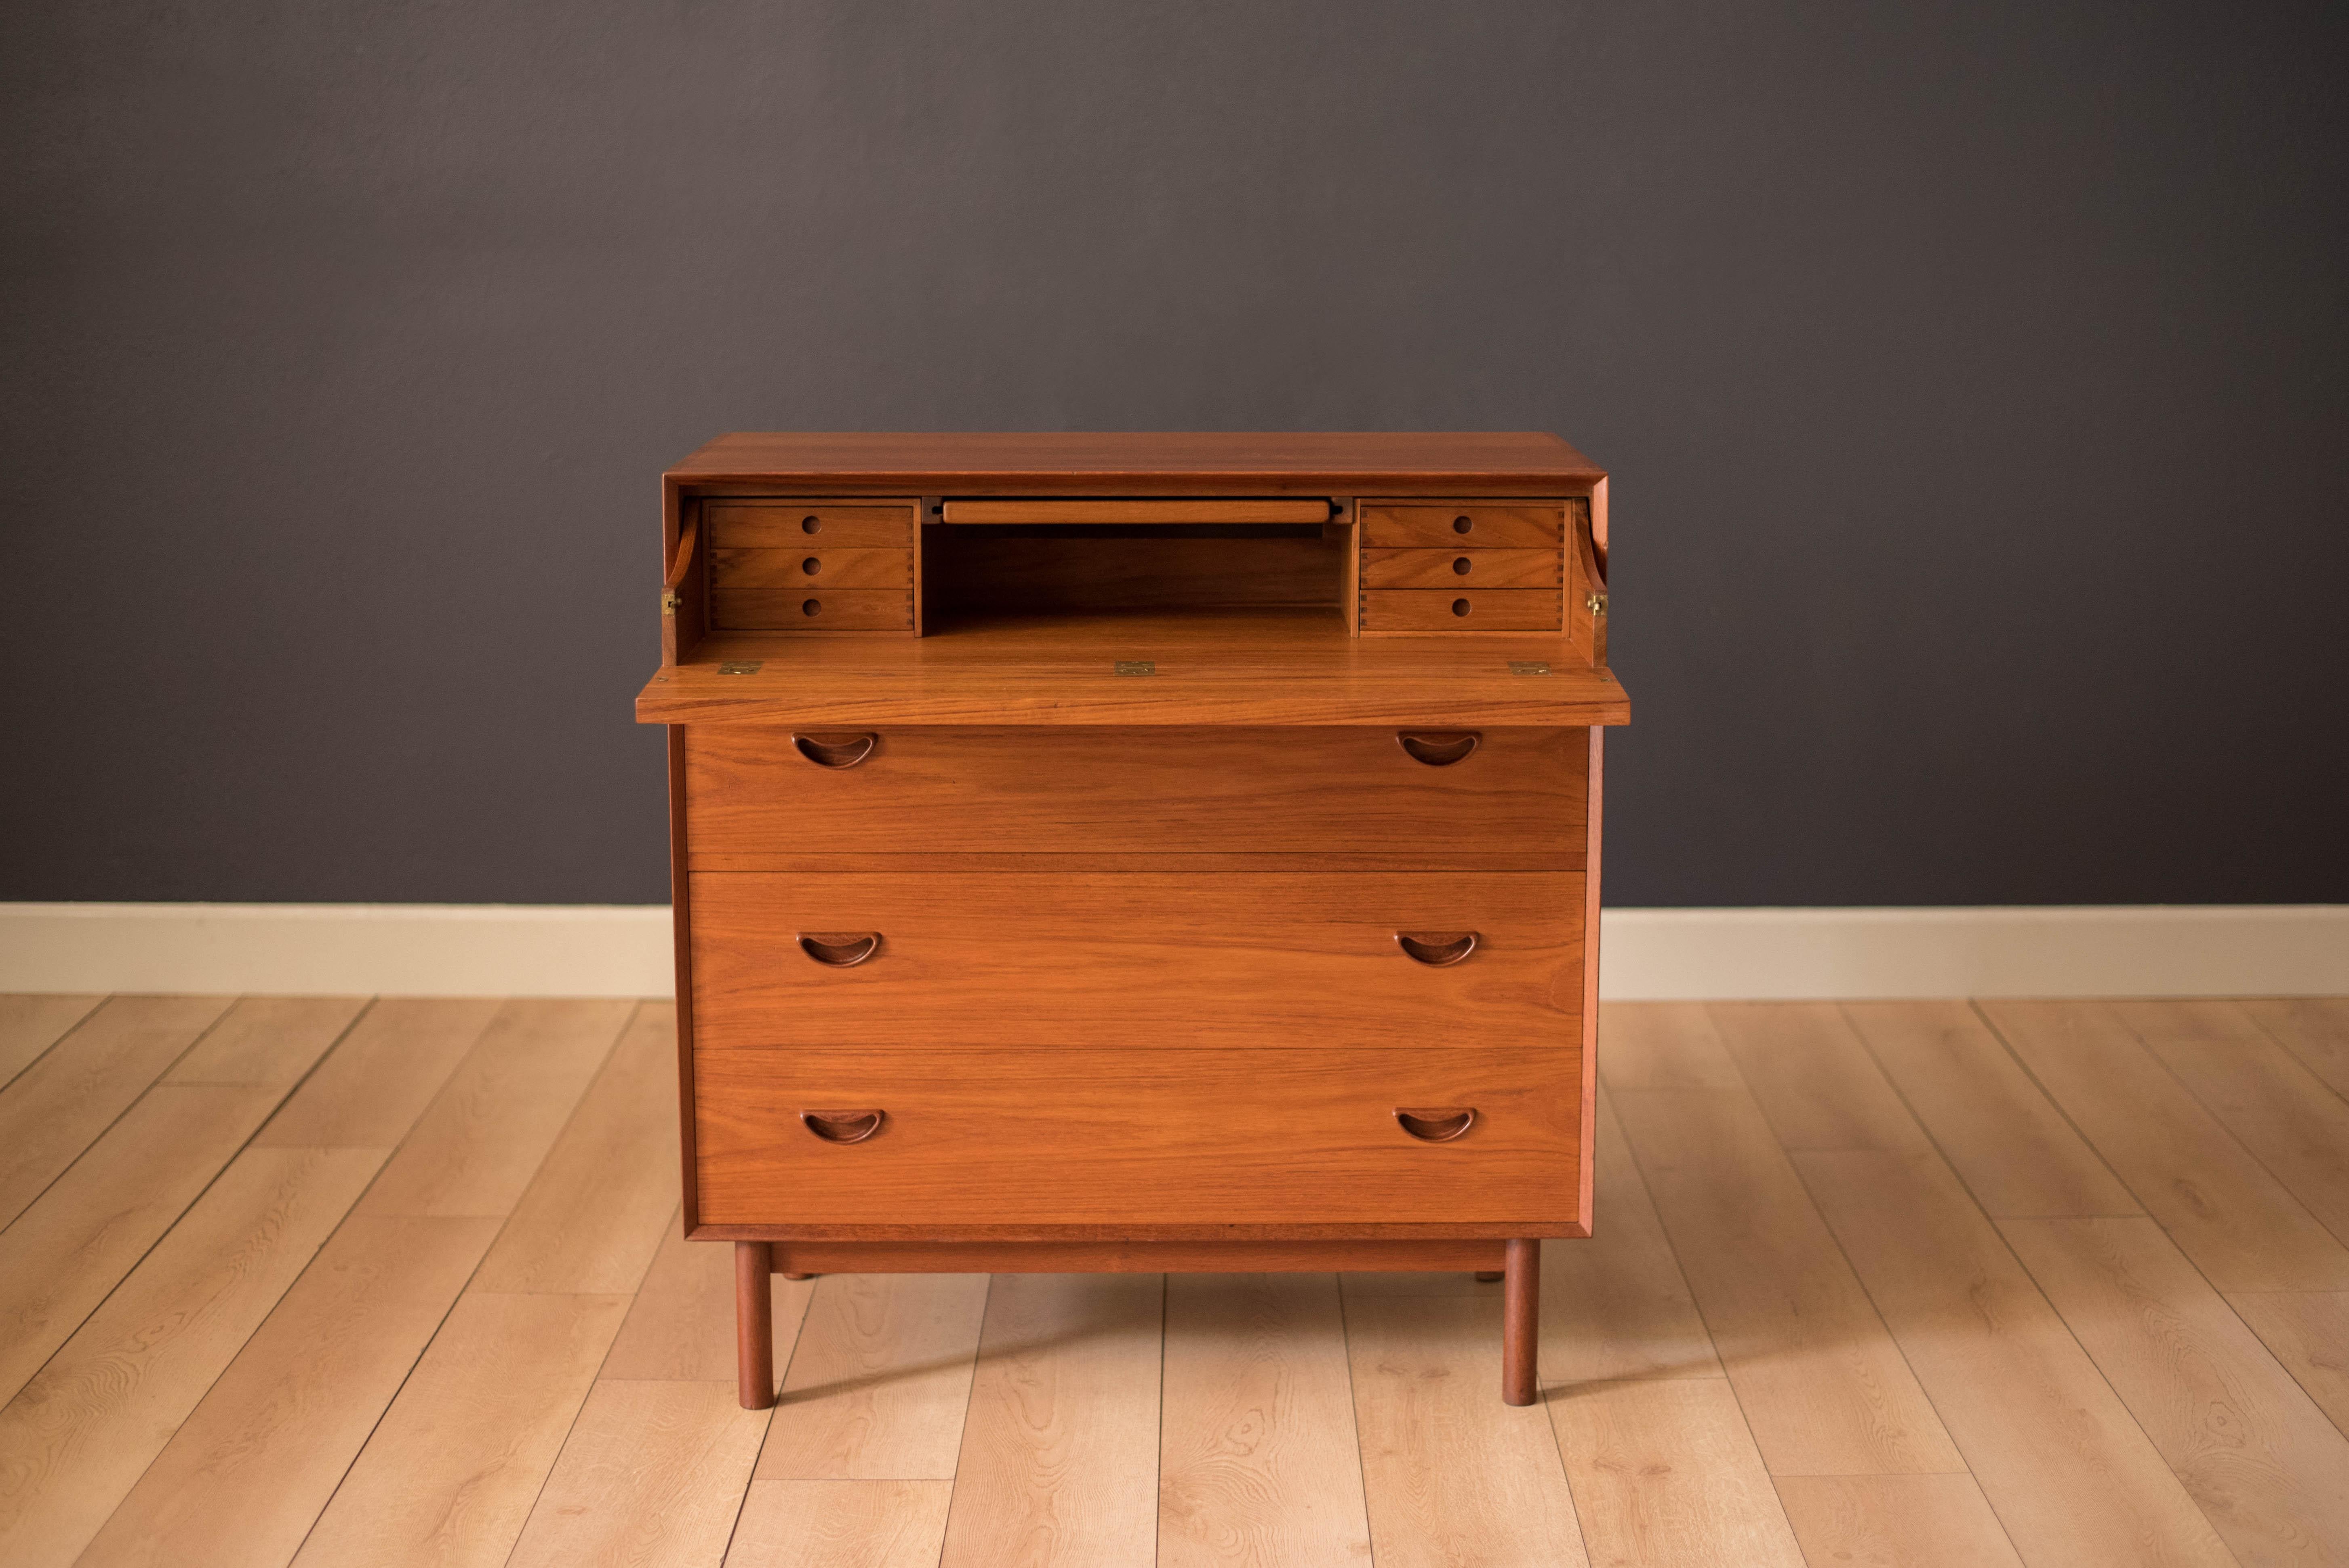 Mid-Century Modern teak dresser chest designed by Peter Hvidt and Orla Mølgaard-Nielsen for Søborg Møbler. This piece includes three storage drawers with signature sculpted handles. Features a hidden mirror vanity slide out desk that reveals six